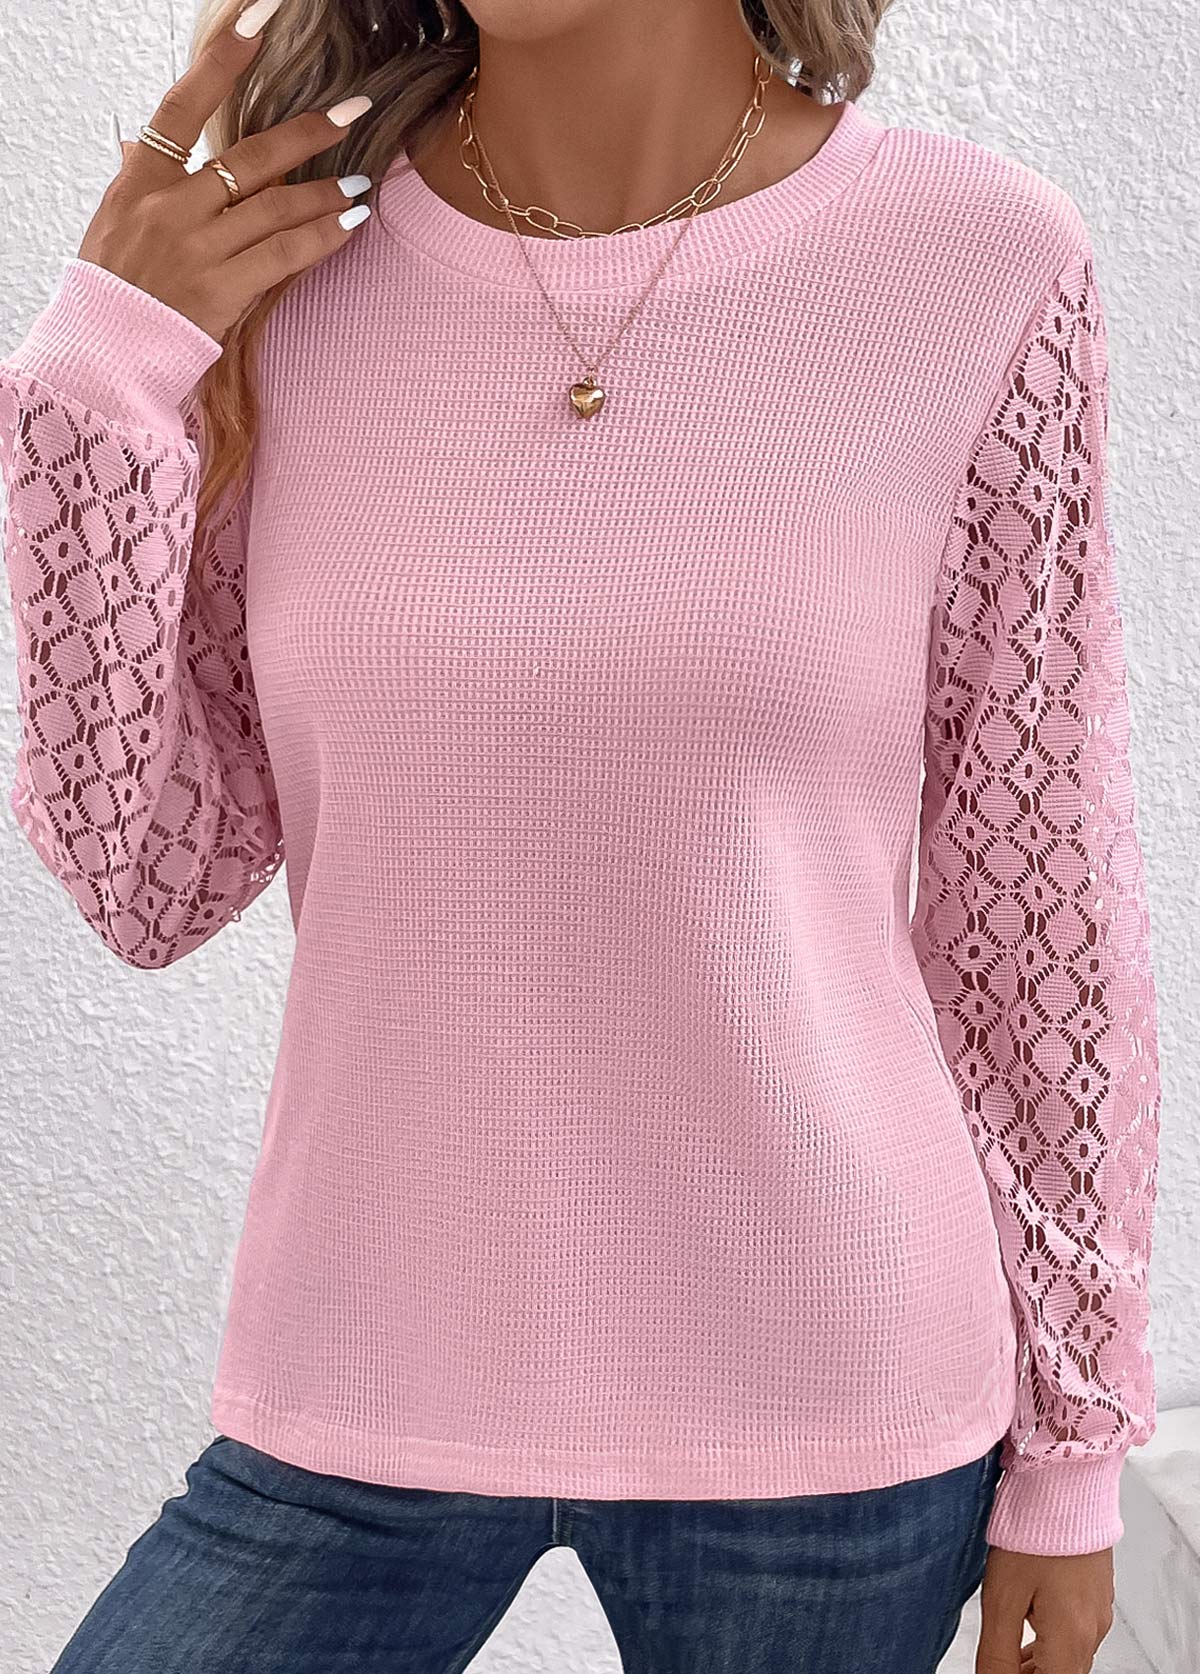 Lace Round Neck Long Sleeve Pink T Shirt